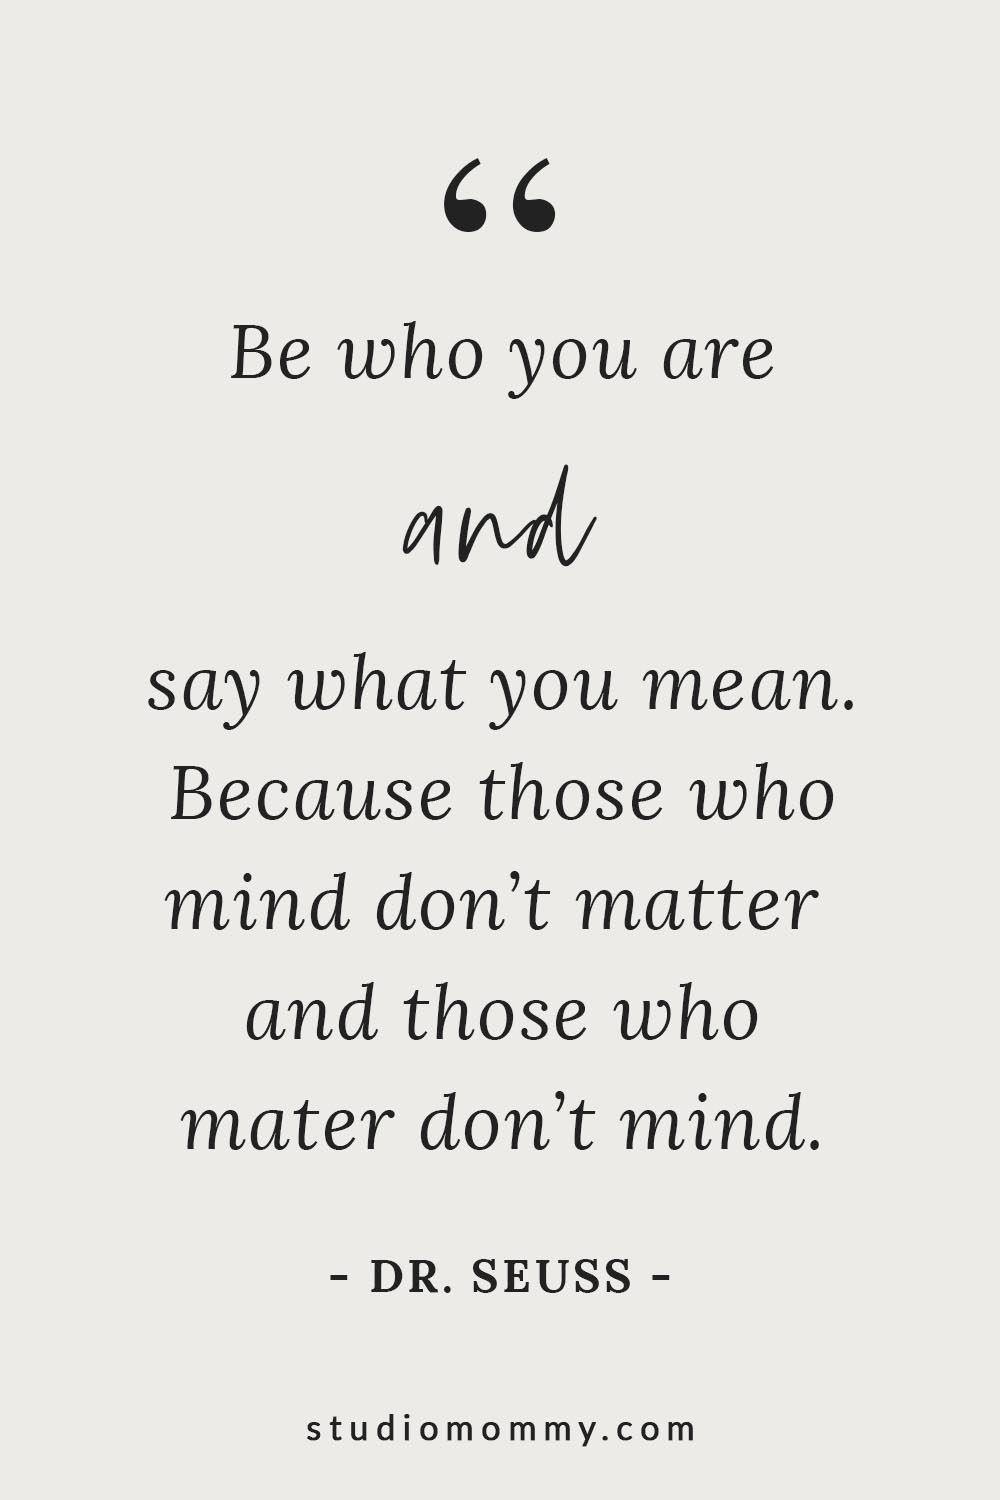 Be who you are and say what you mean. Because those who mind don't matter and those who matter don't mind. - Dr. Seuss @studiomommy